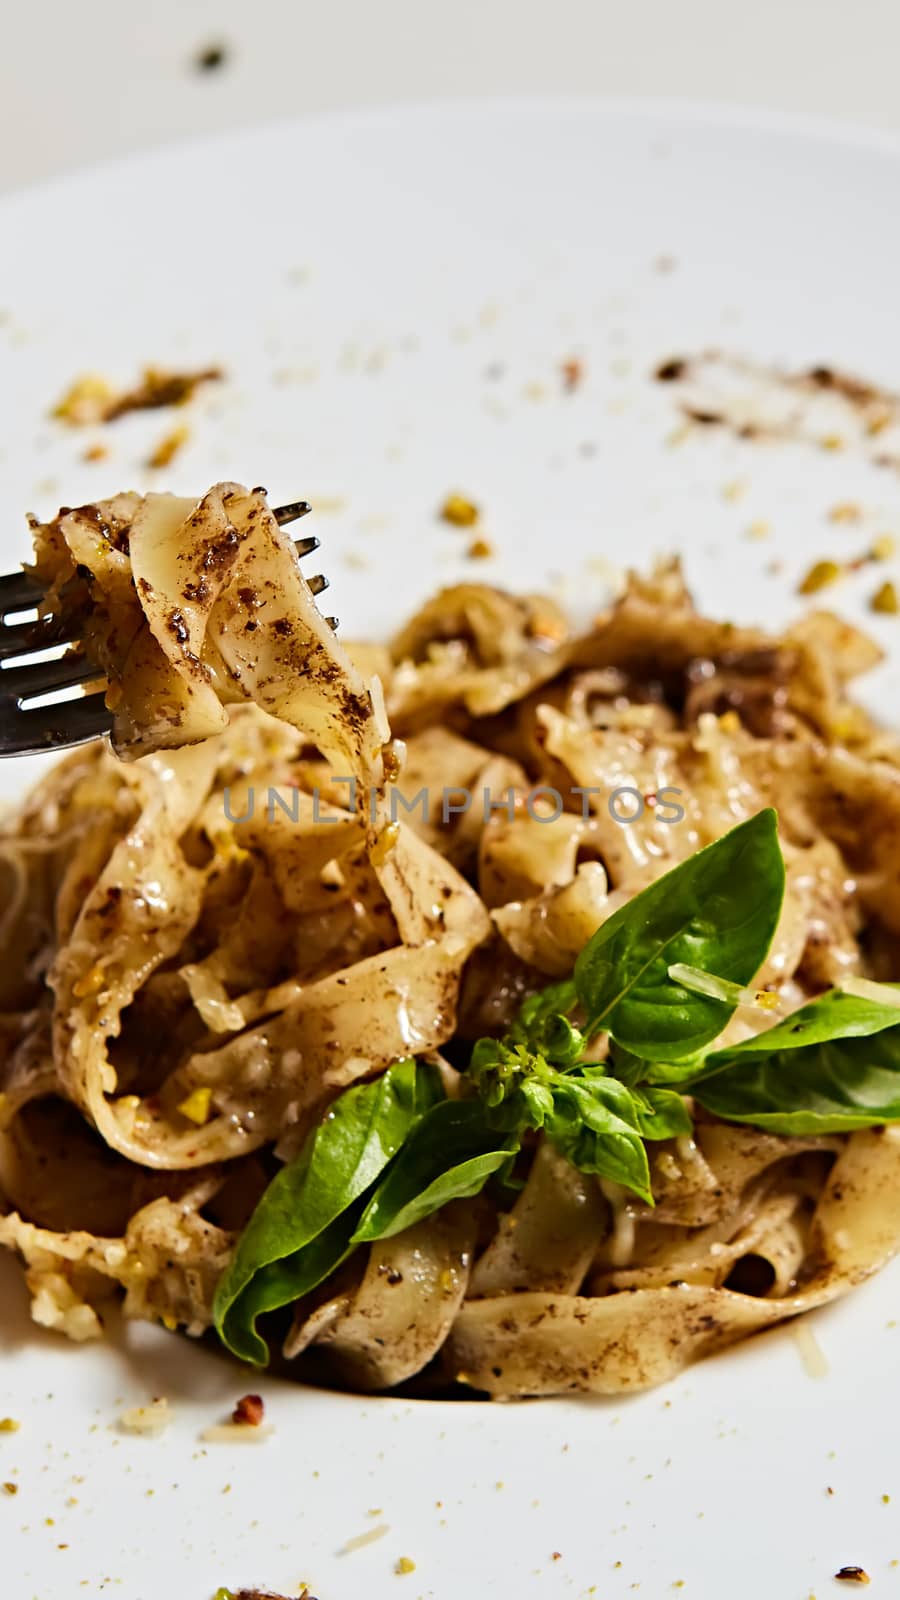 Tagliatelle with mushrooms and decorated with basil leaves. by sarymsakov